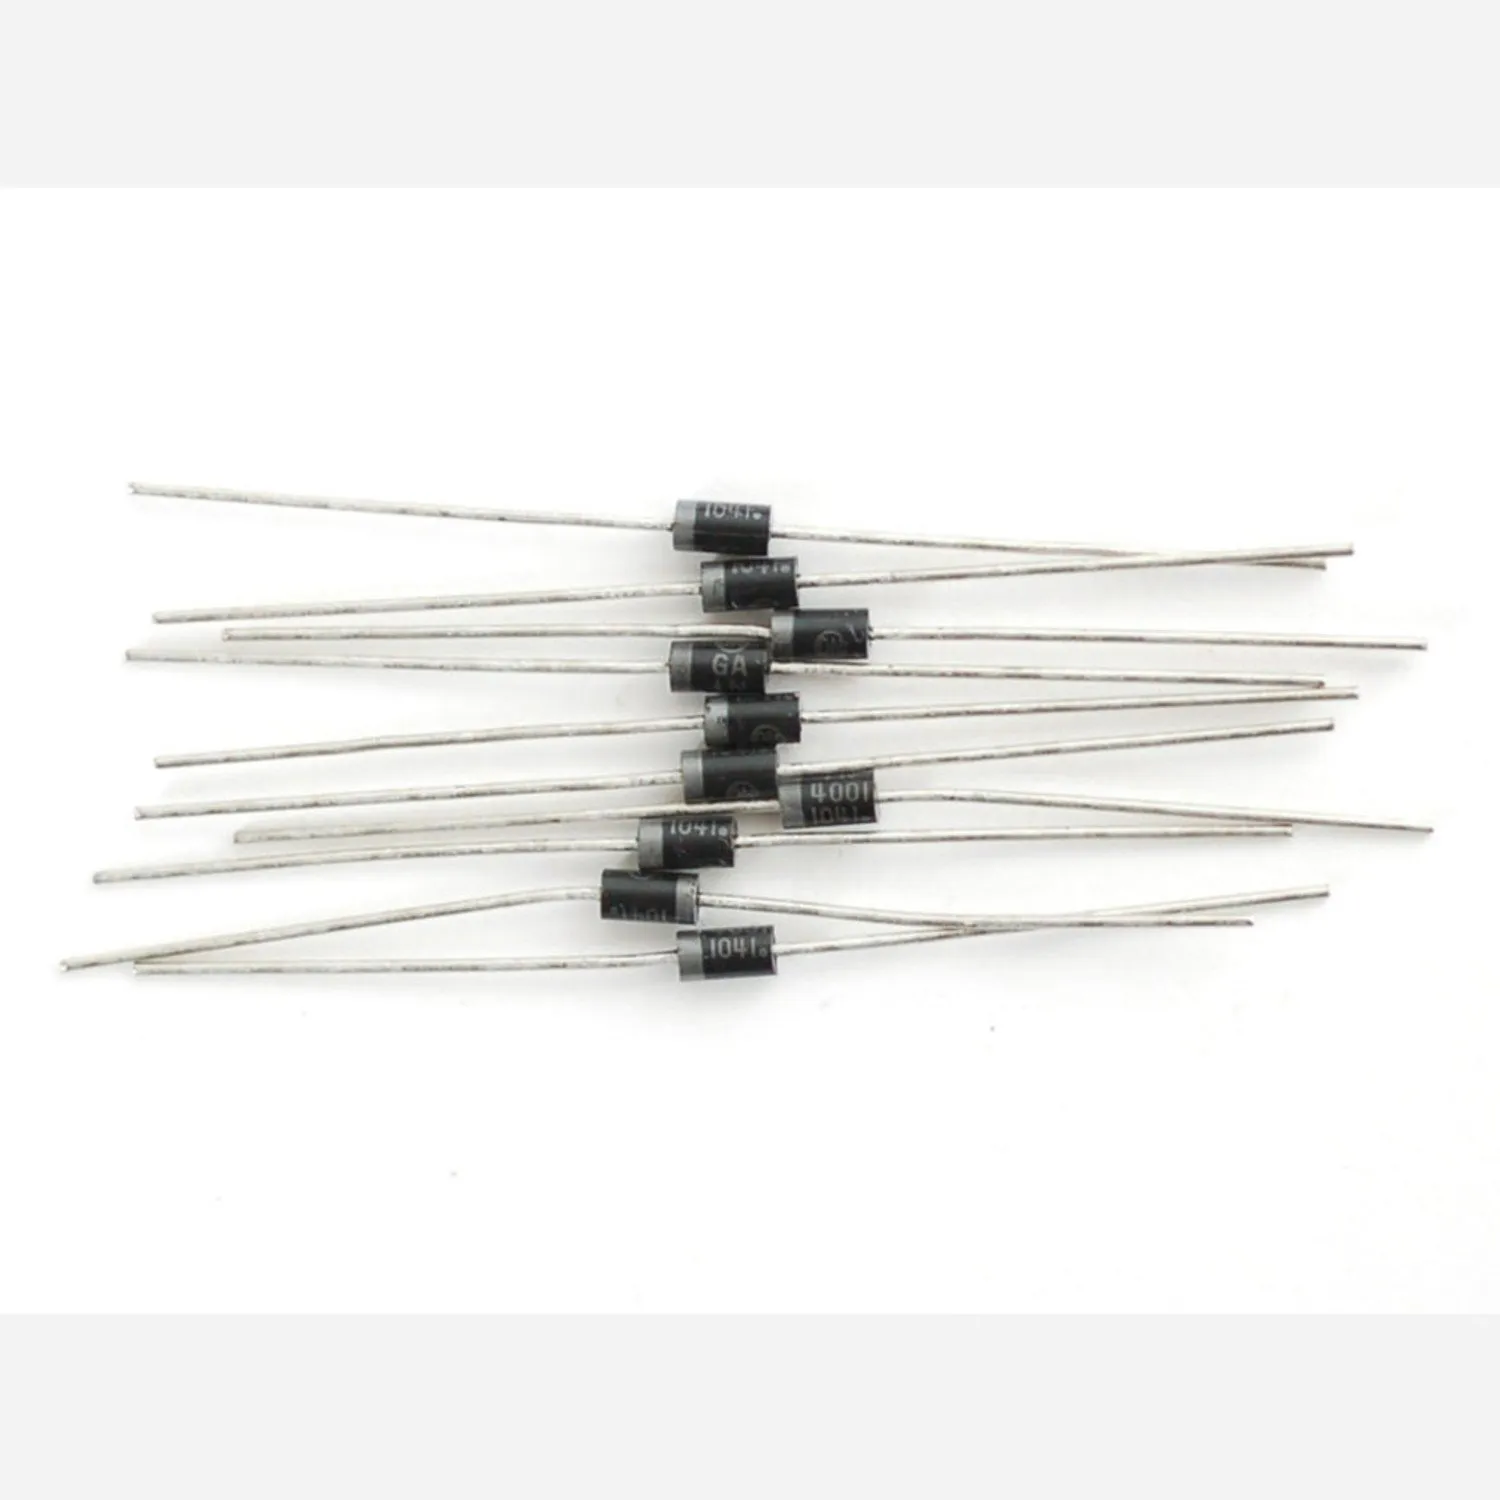 Photo of 1N4001 Diode - 10 pack